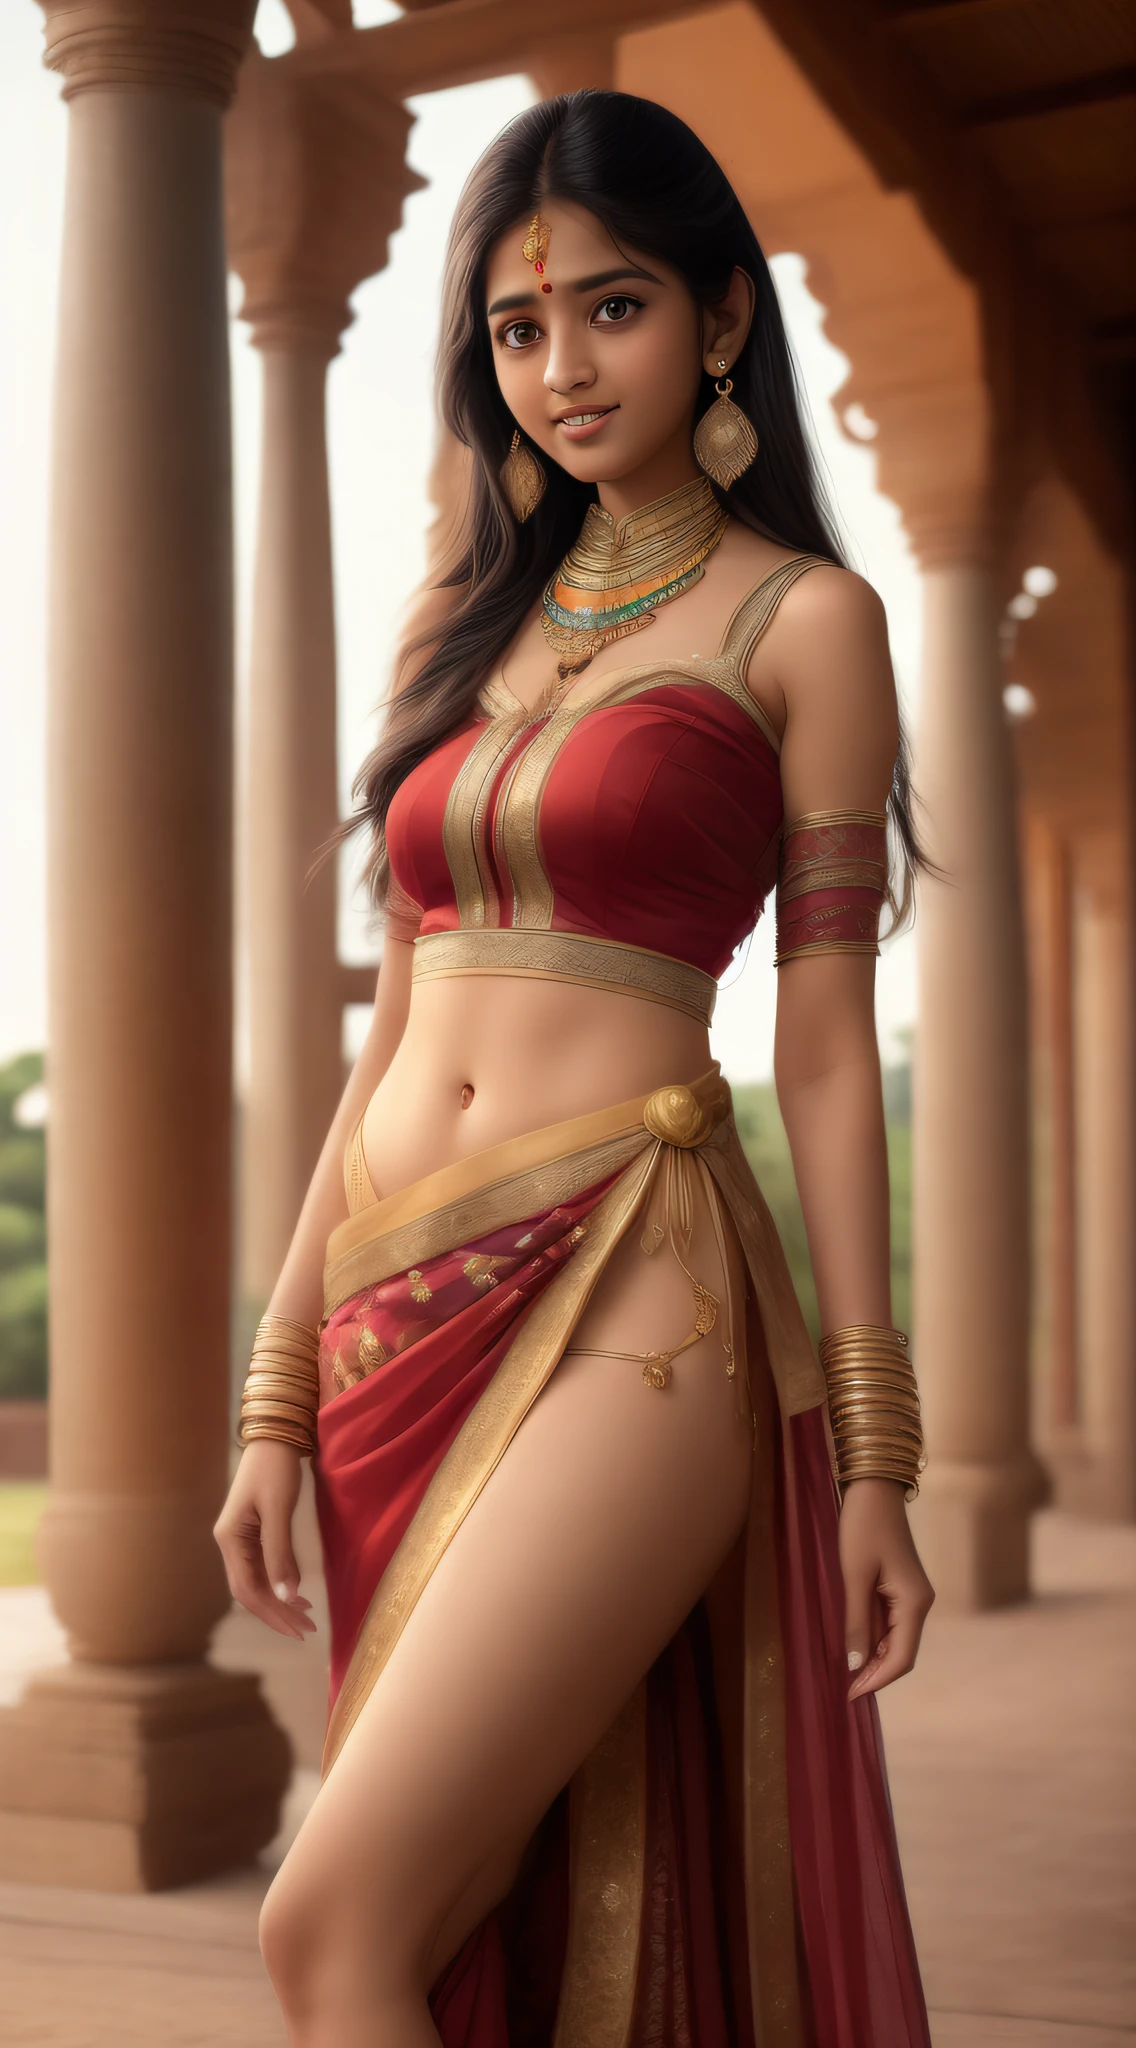 "Best quality, masterpiece, ultra high res, (photorealistic:1.4), anime girl, shoulder, charming, full body, slim legs, wearing Indian dress, looking at the camera."